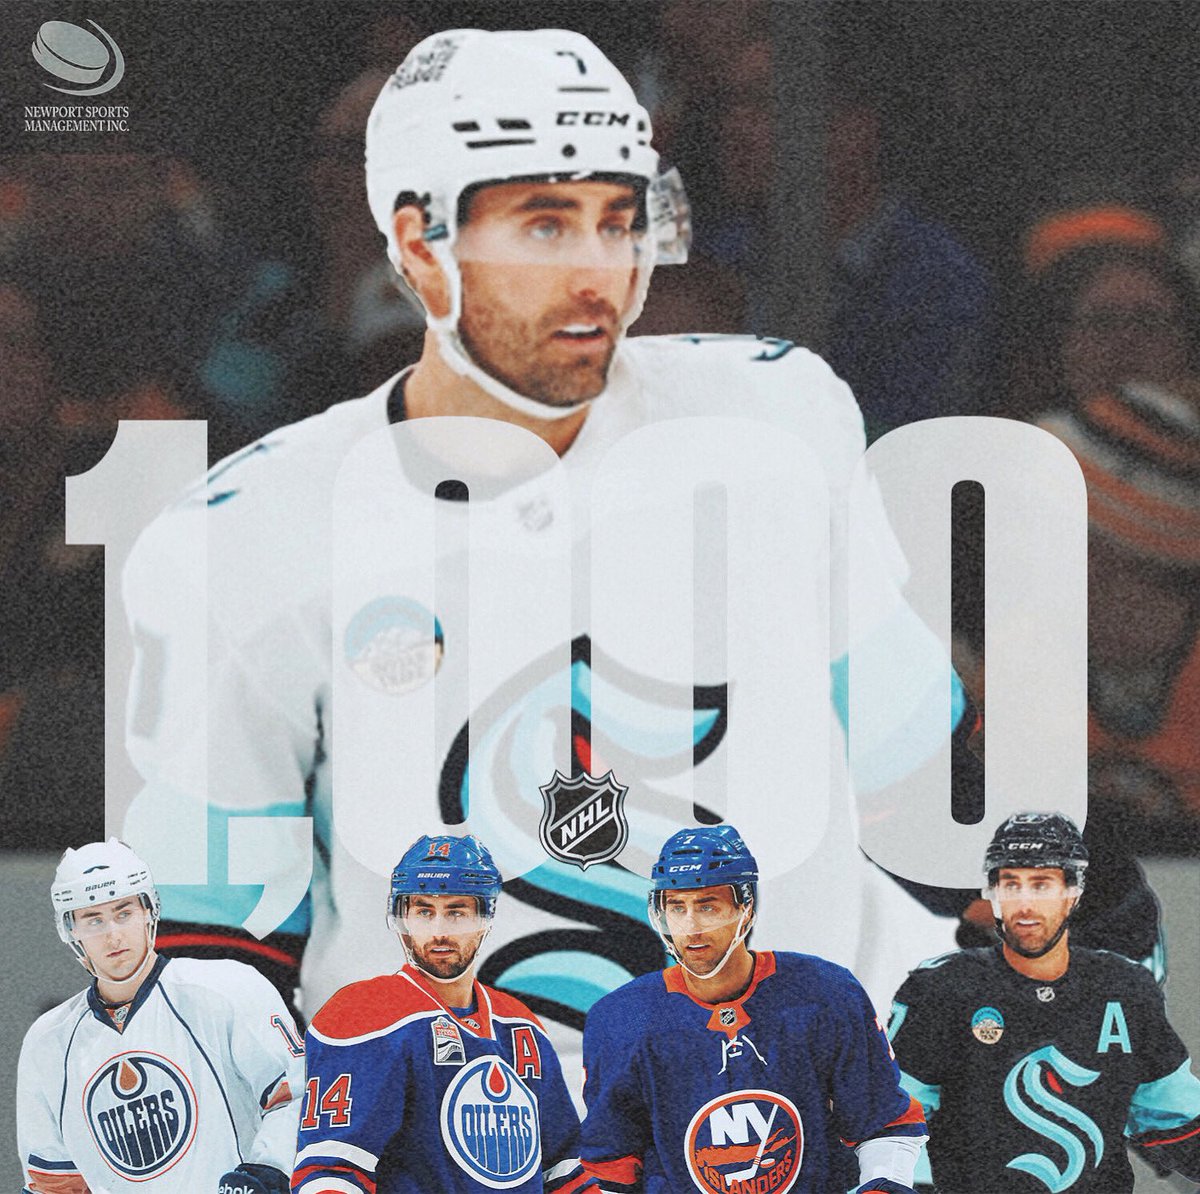 1,000 NHL Games Played. Congratulations to Jordan Eberle and his family! 👏 #Ebs1000 #SilverStickClub